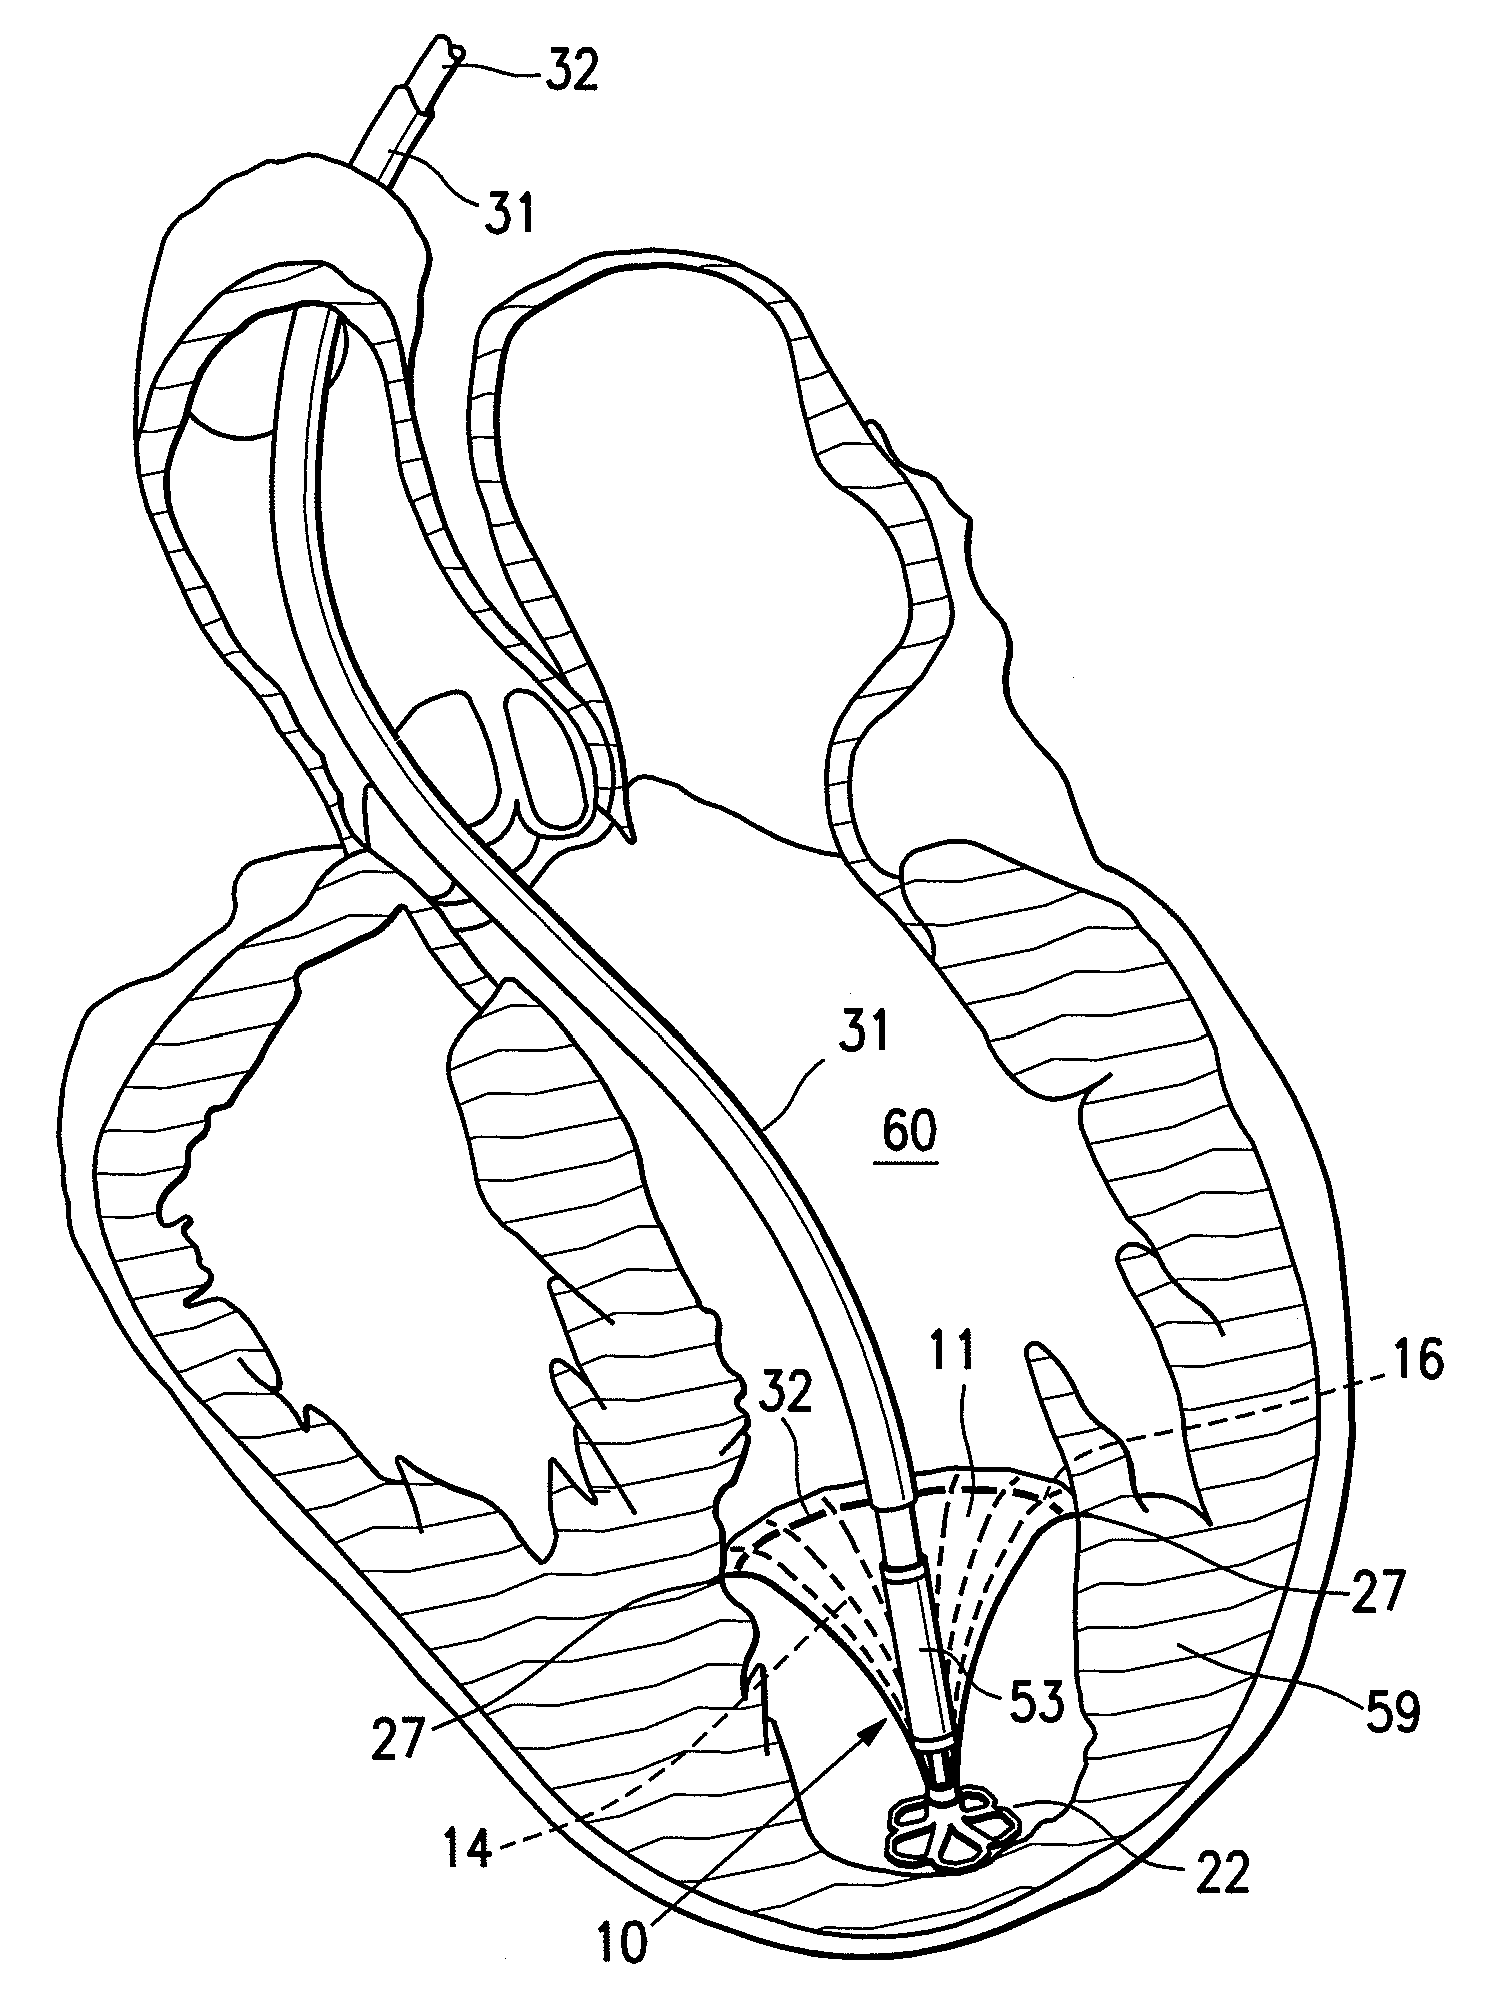 System for improving cardiac function by sealing a partitioning membrane within a ventricle